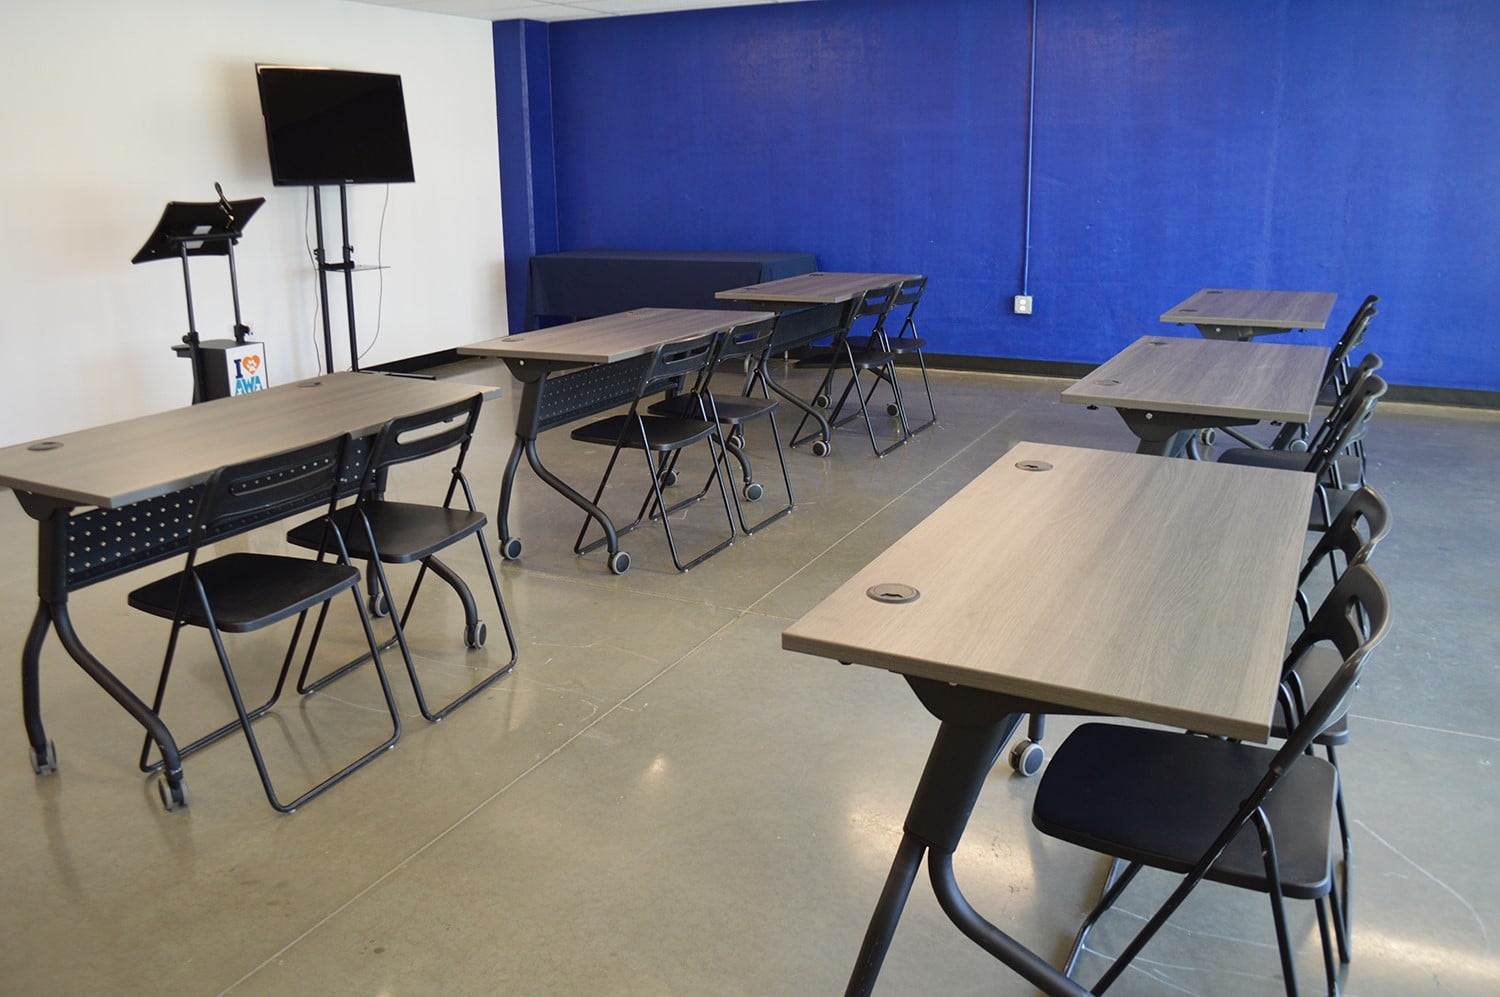 Animal Welfare Association Community Room setup with desks and chairs for event rental